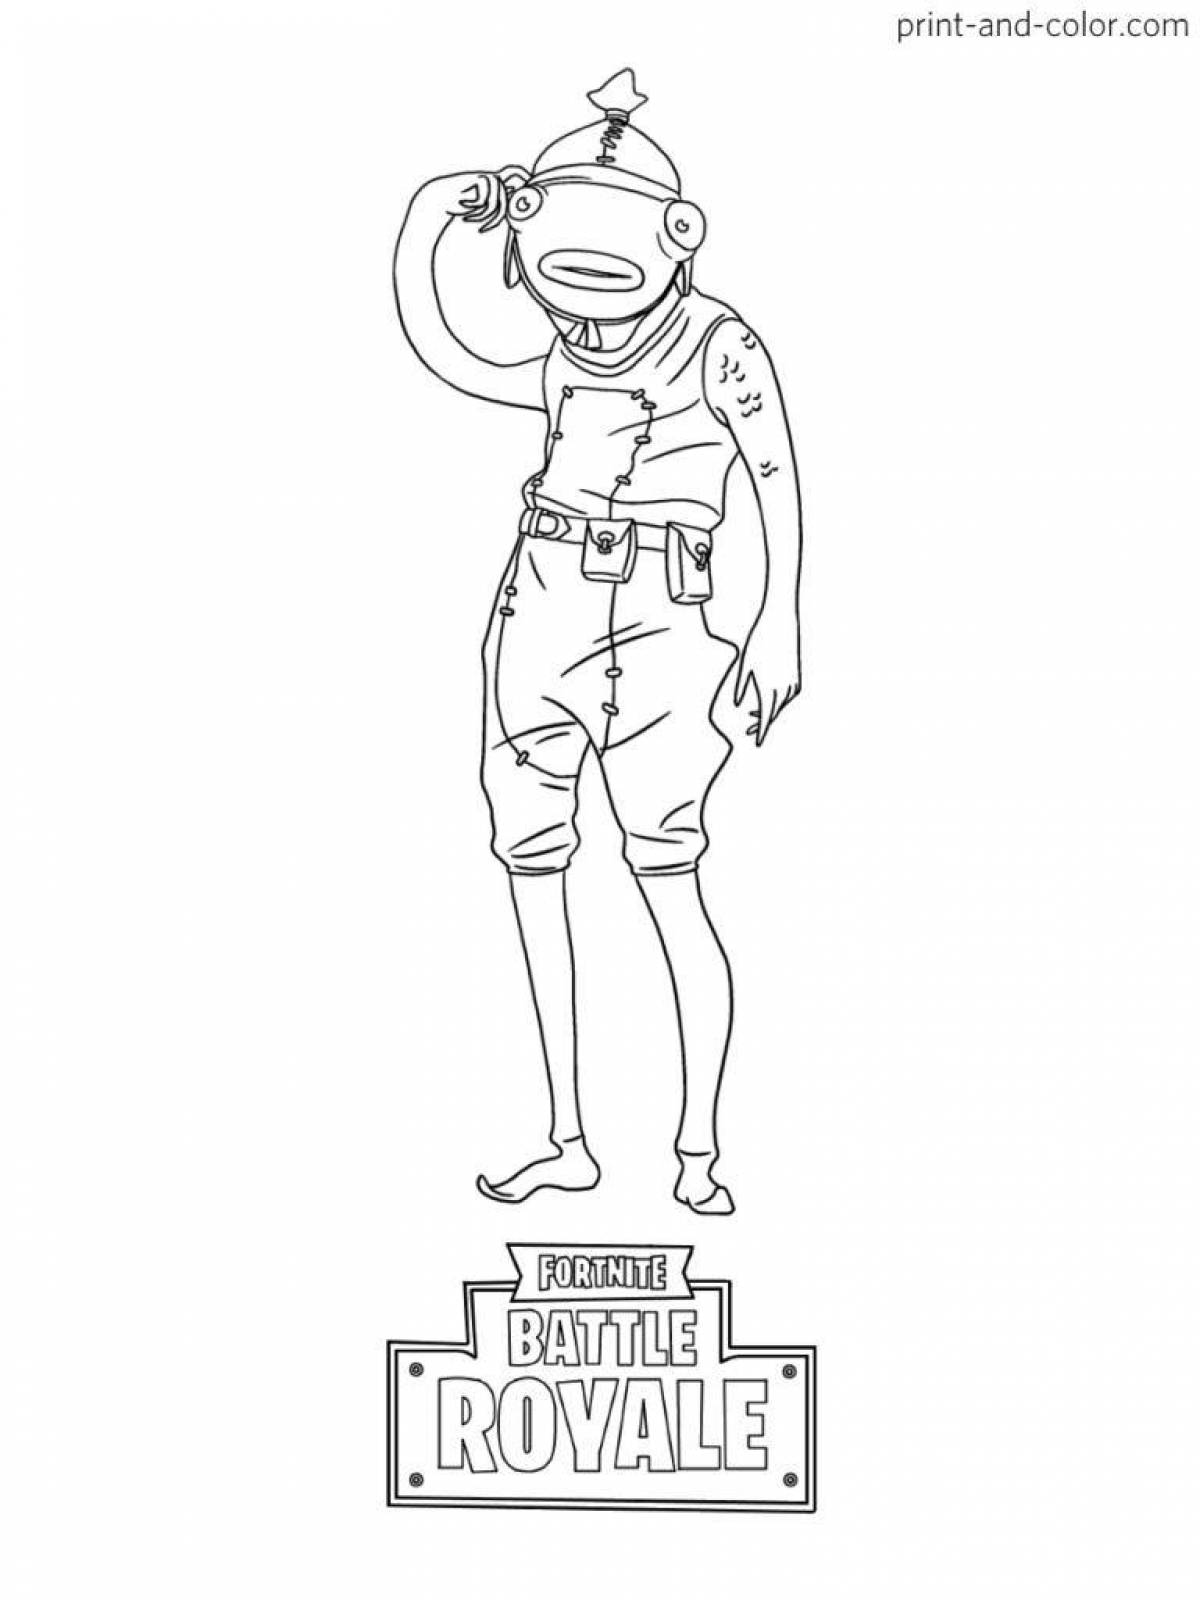 Lovely banana fortnite coloring page